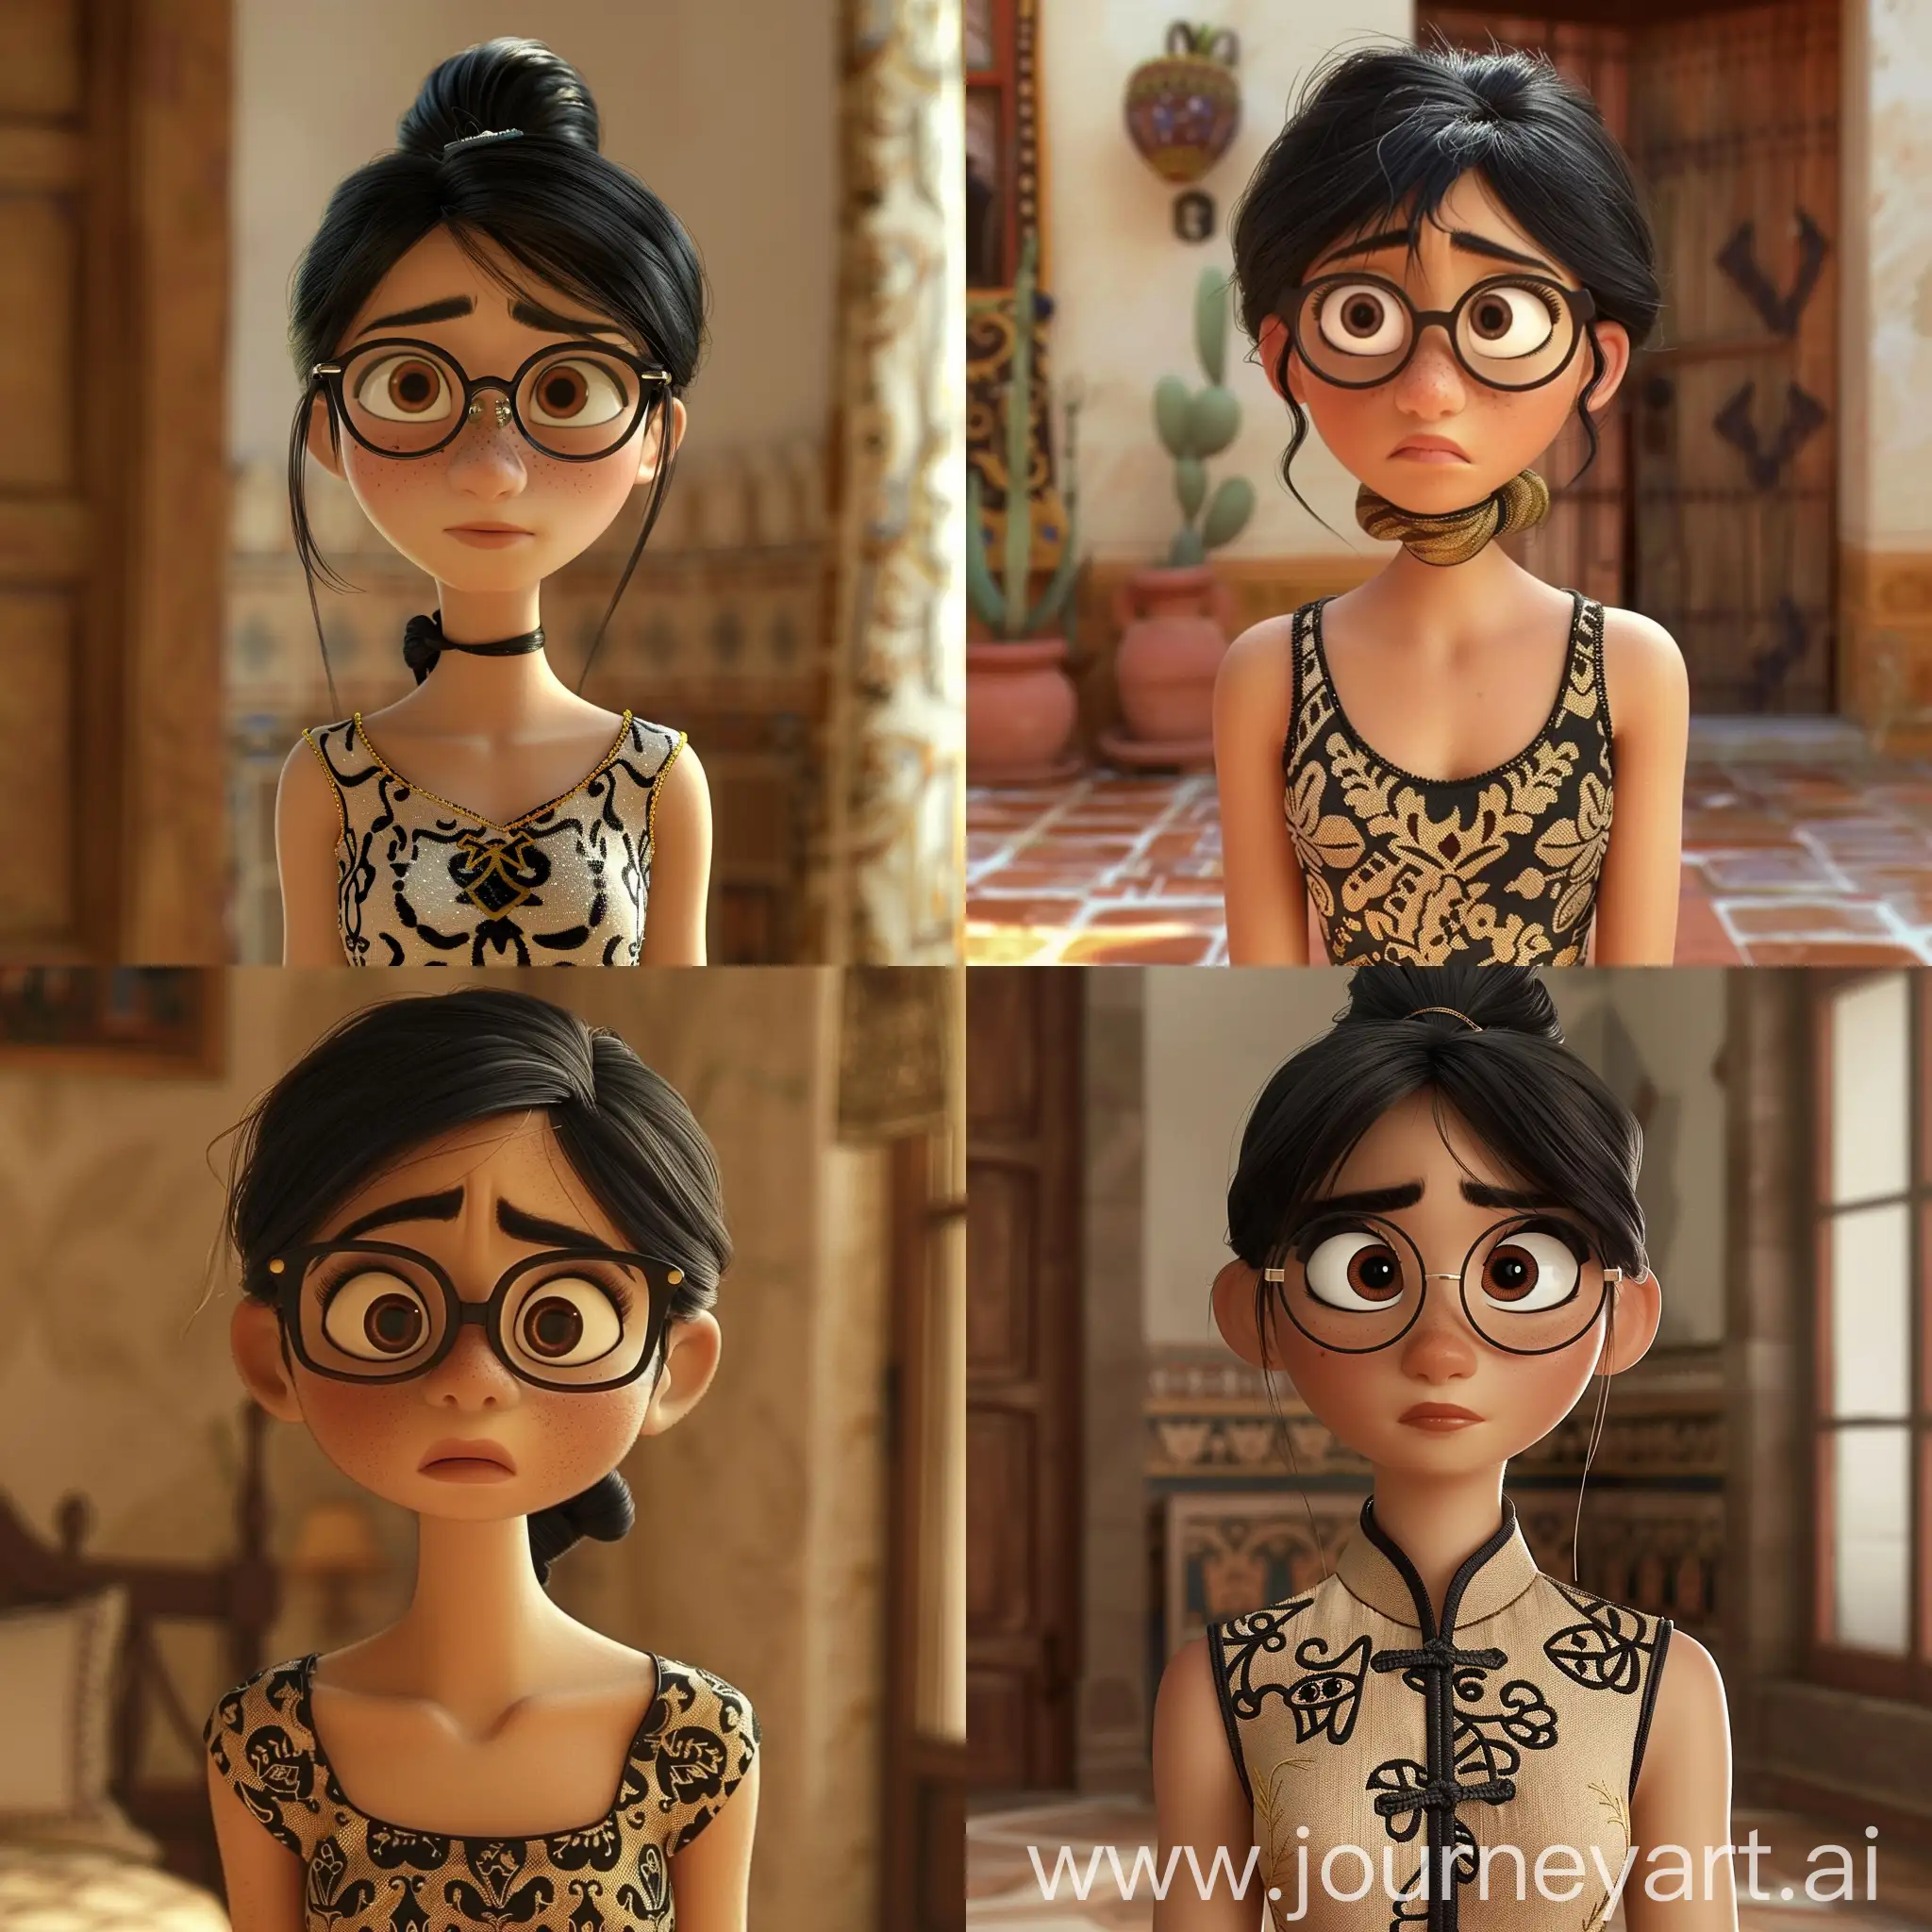 Scene from pixar animation a brunette woman with black hair tied up, she wears glasses and is a little fat and wears a simple dress with black and gold designs she has an oval face, she has a thin mouth and a wide nose